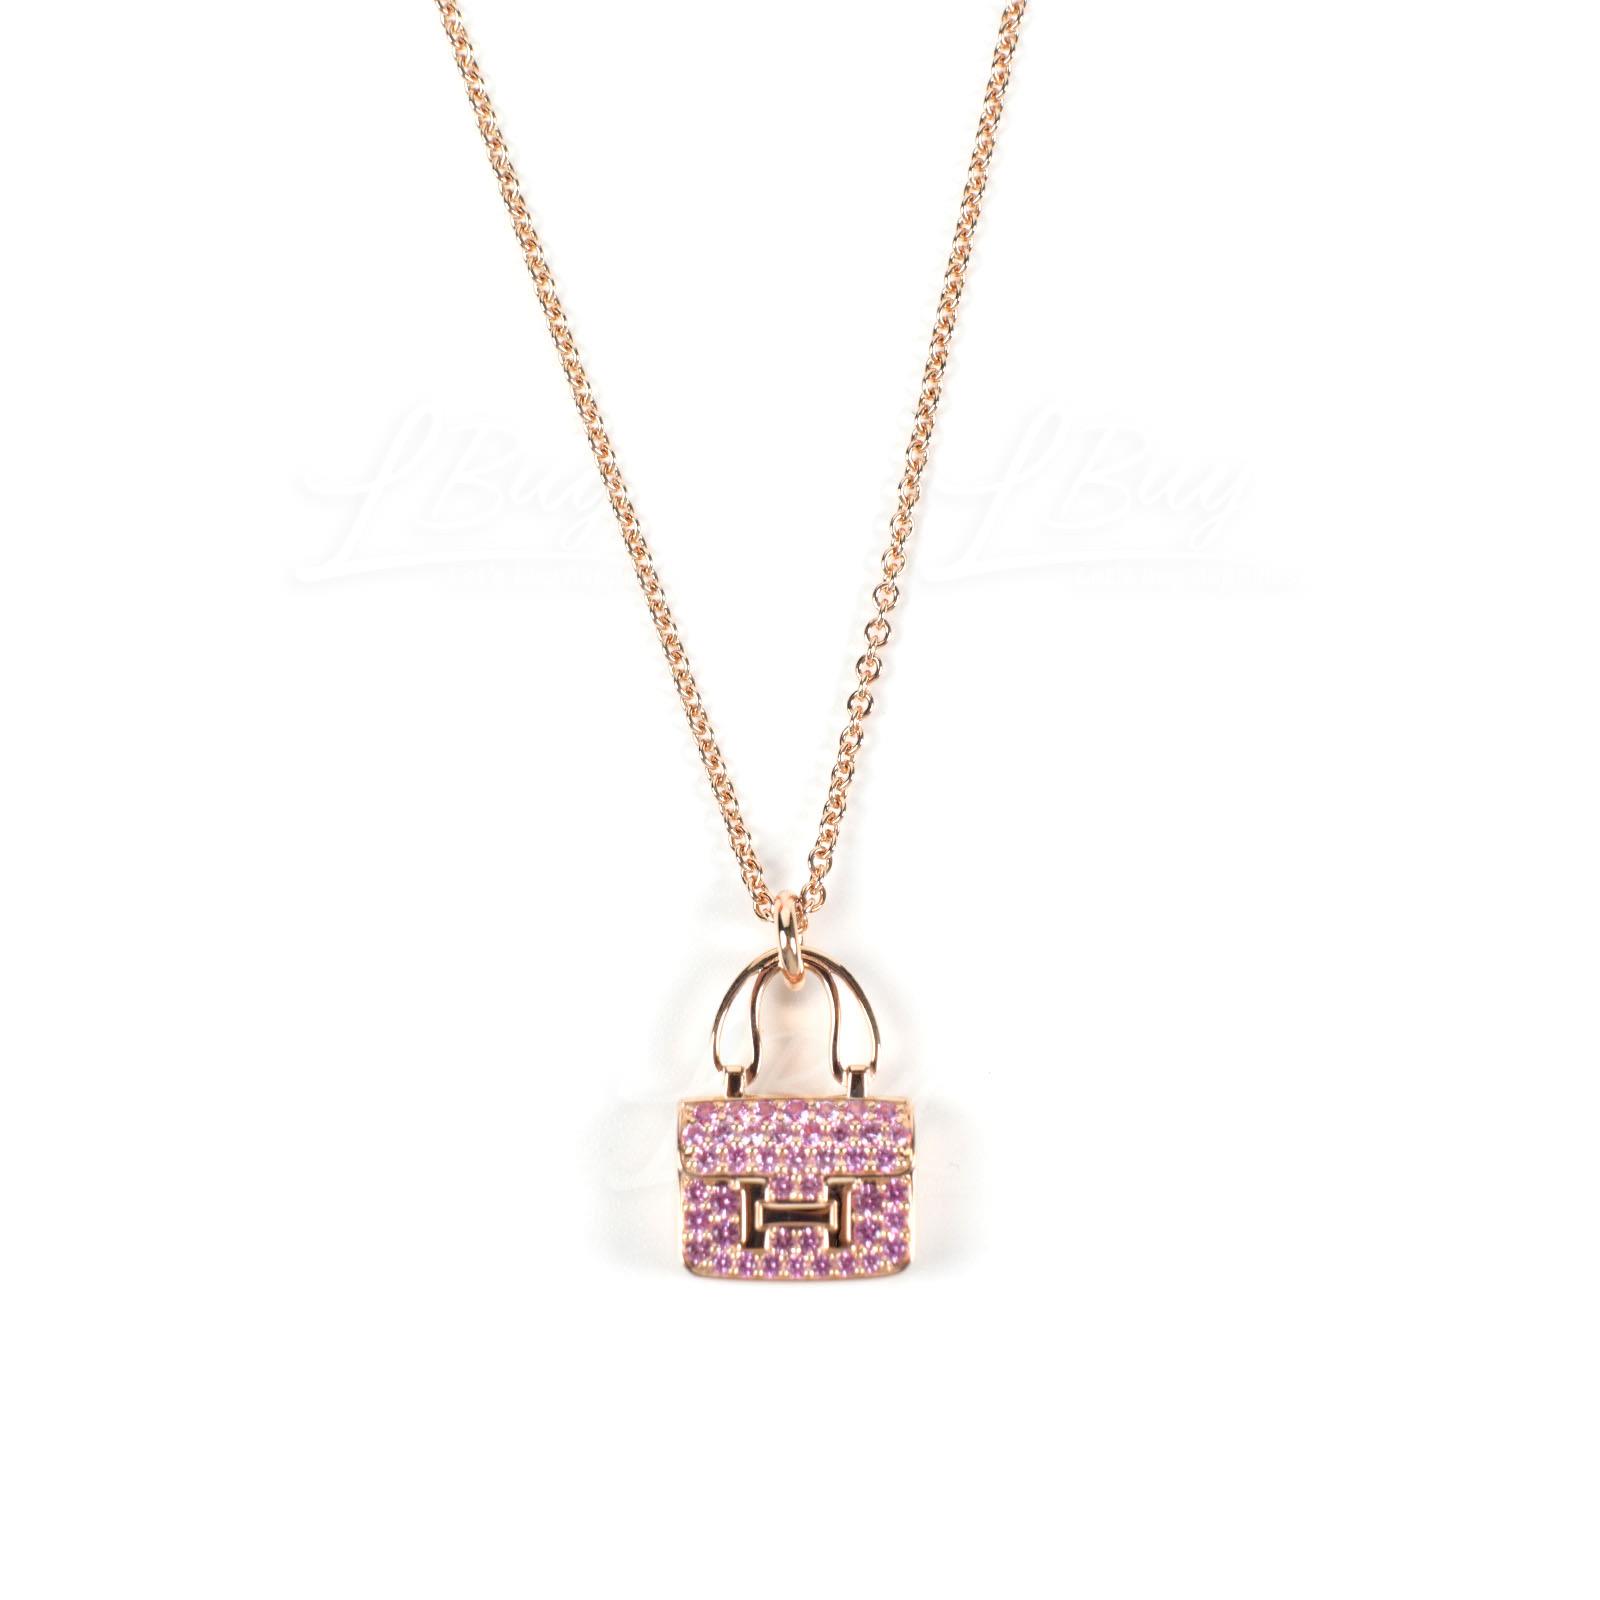 Hermes Constance Amulette Pendant in Rose Gold set with 43 Pink Sapphire Gemstones (0.53 ct)